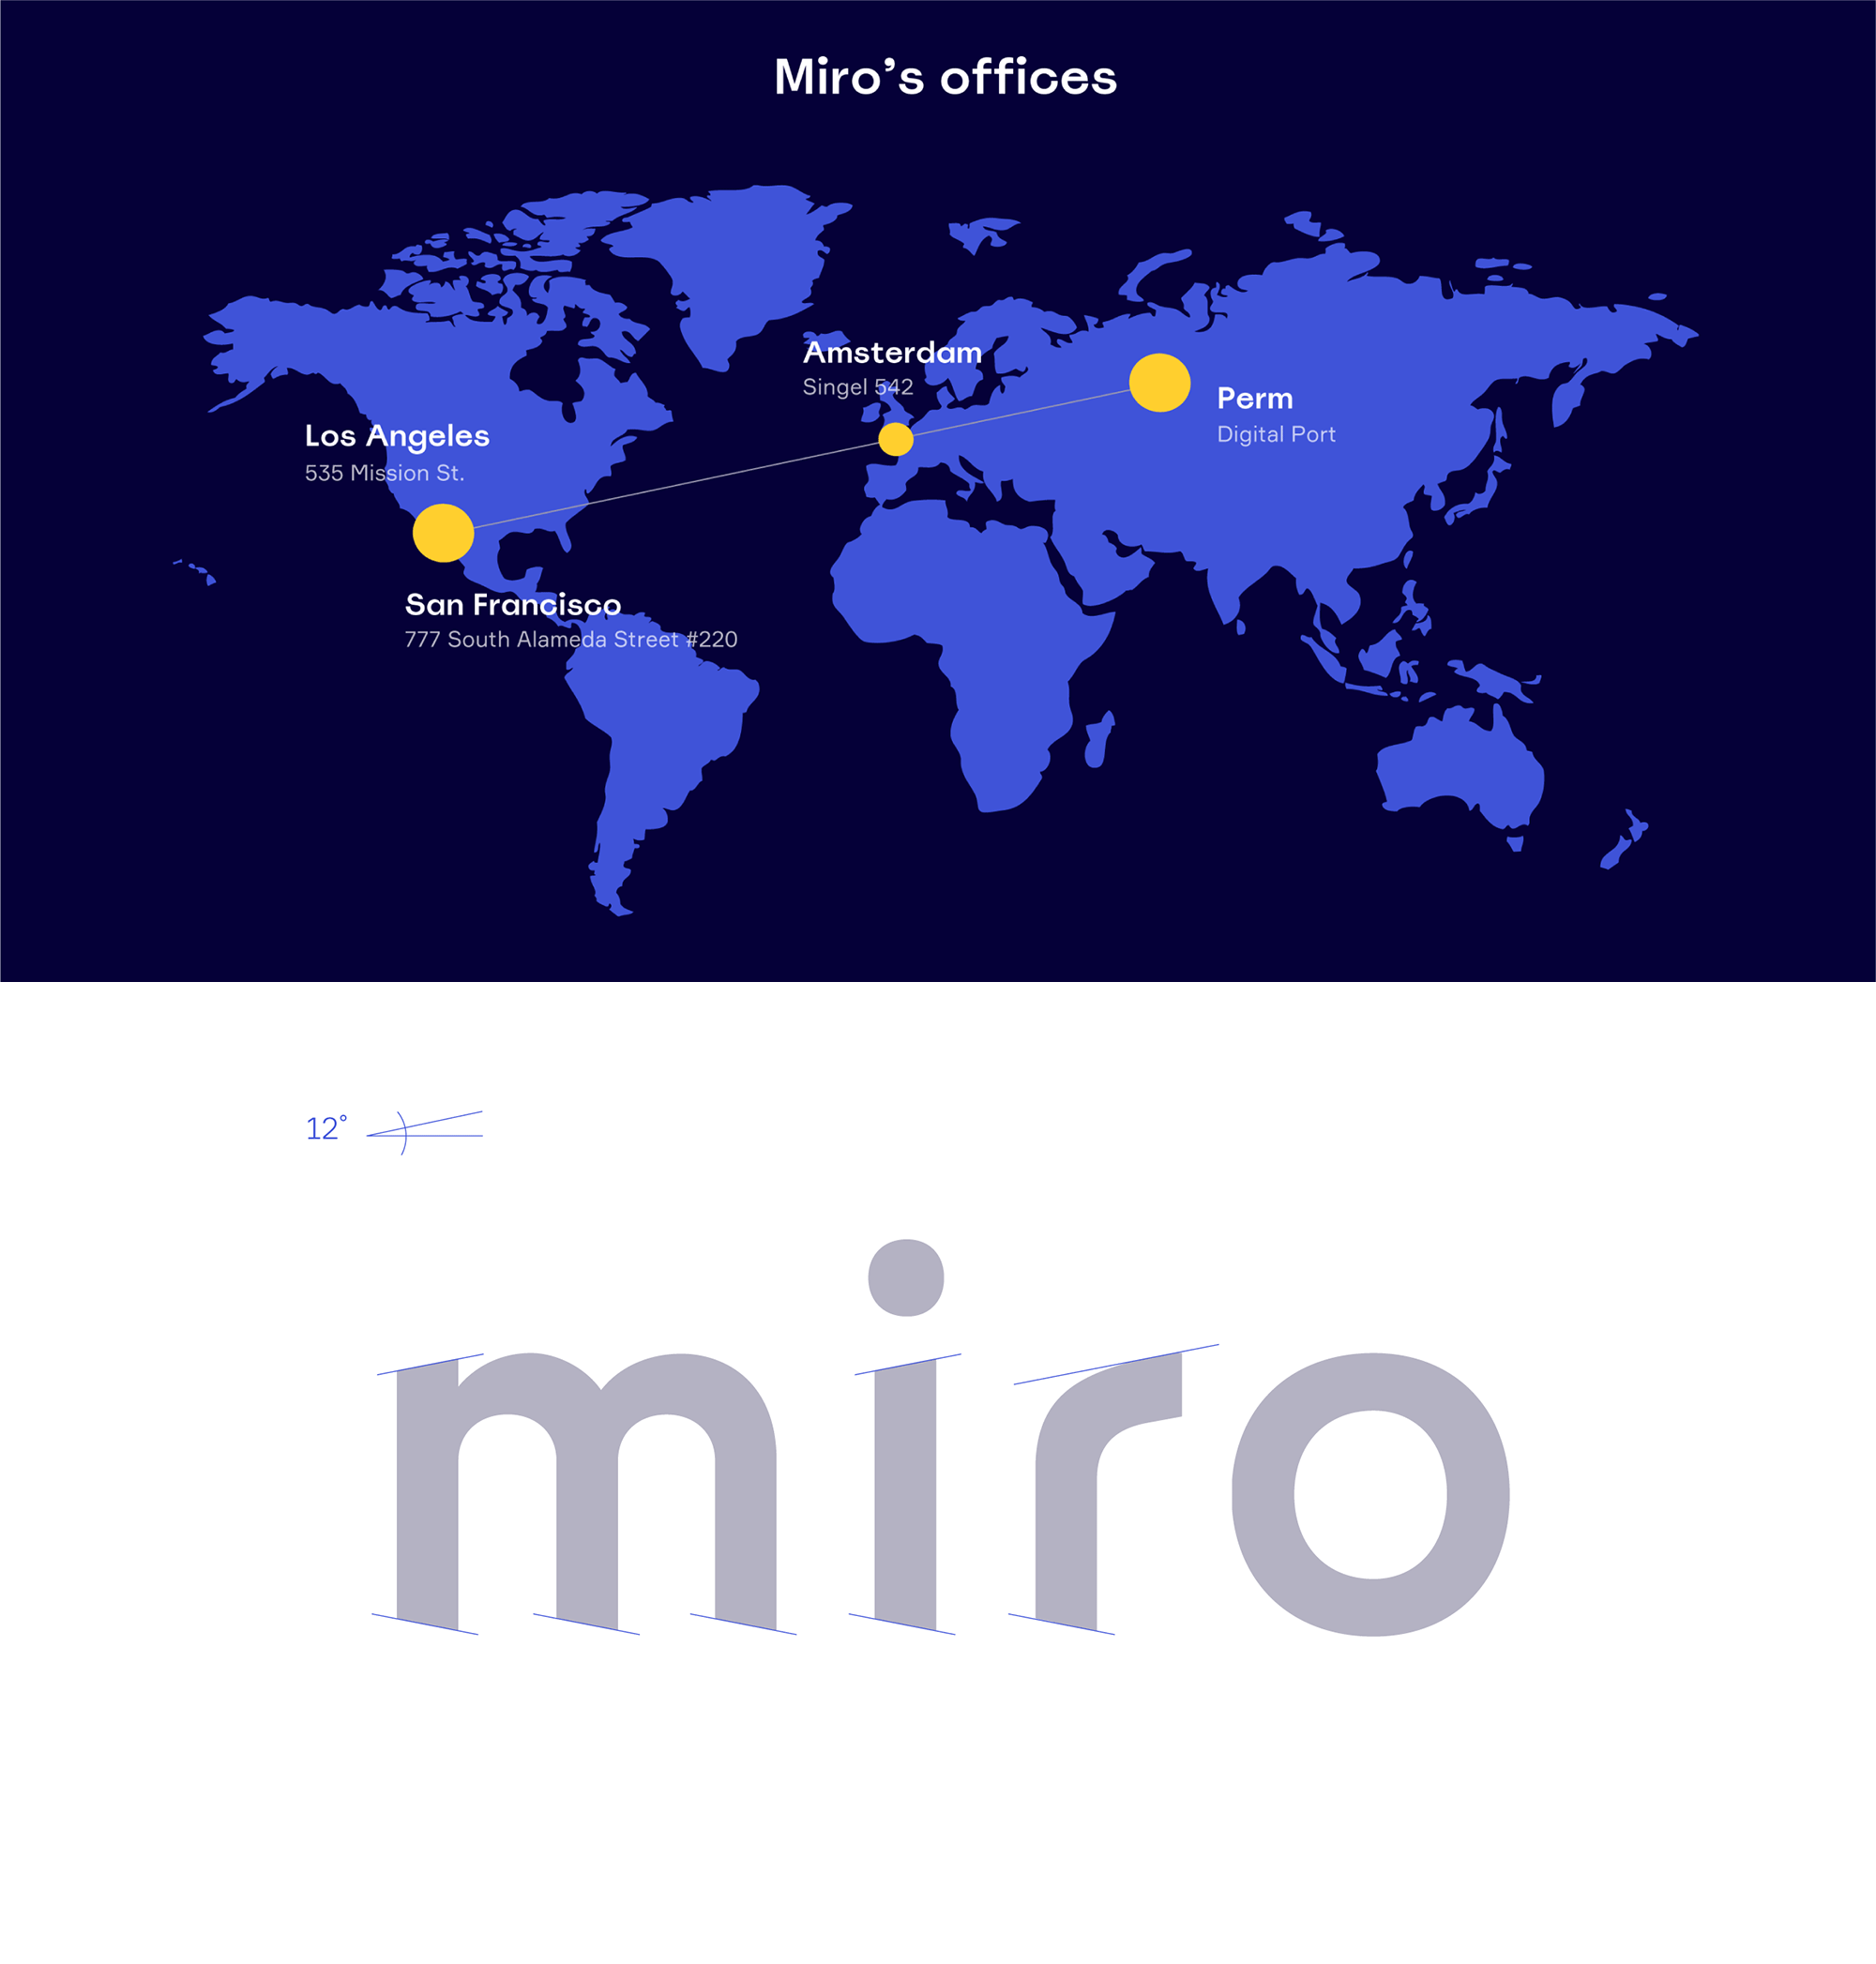 New Logo and Identity for Miro by Vruchtvlees